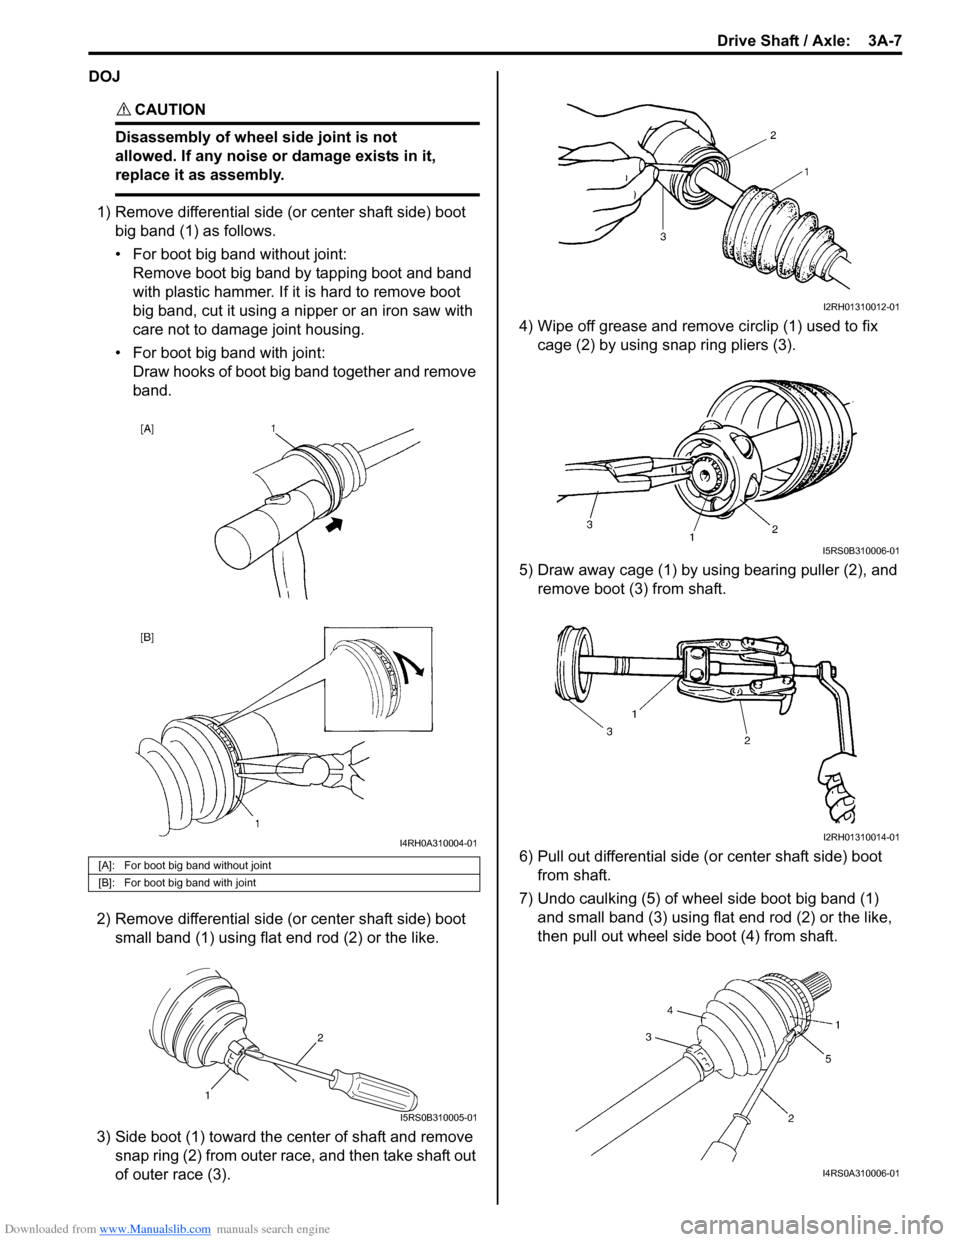 SUZUKI SWIFT 2005 2.G Service Service Manual Downloaded from www.Manualslib.com manuals search engine Drive Shaft / Axle:  3A-7
DOJ
CAUTION! 
Disassembly of wheel side joint is not 
allowed. If any noise or damage exists in it, 
replace it as as